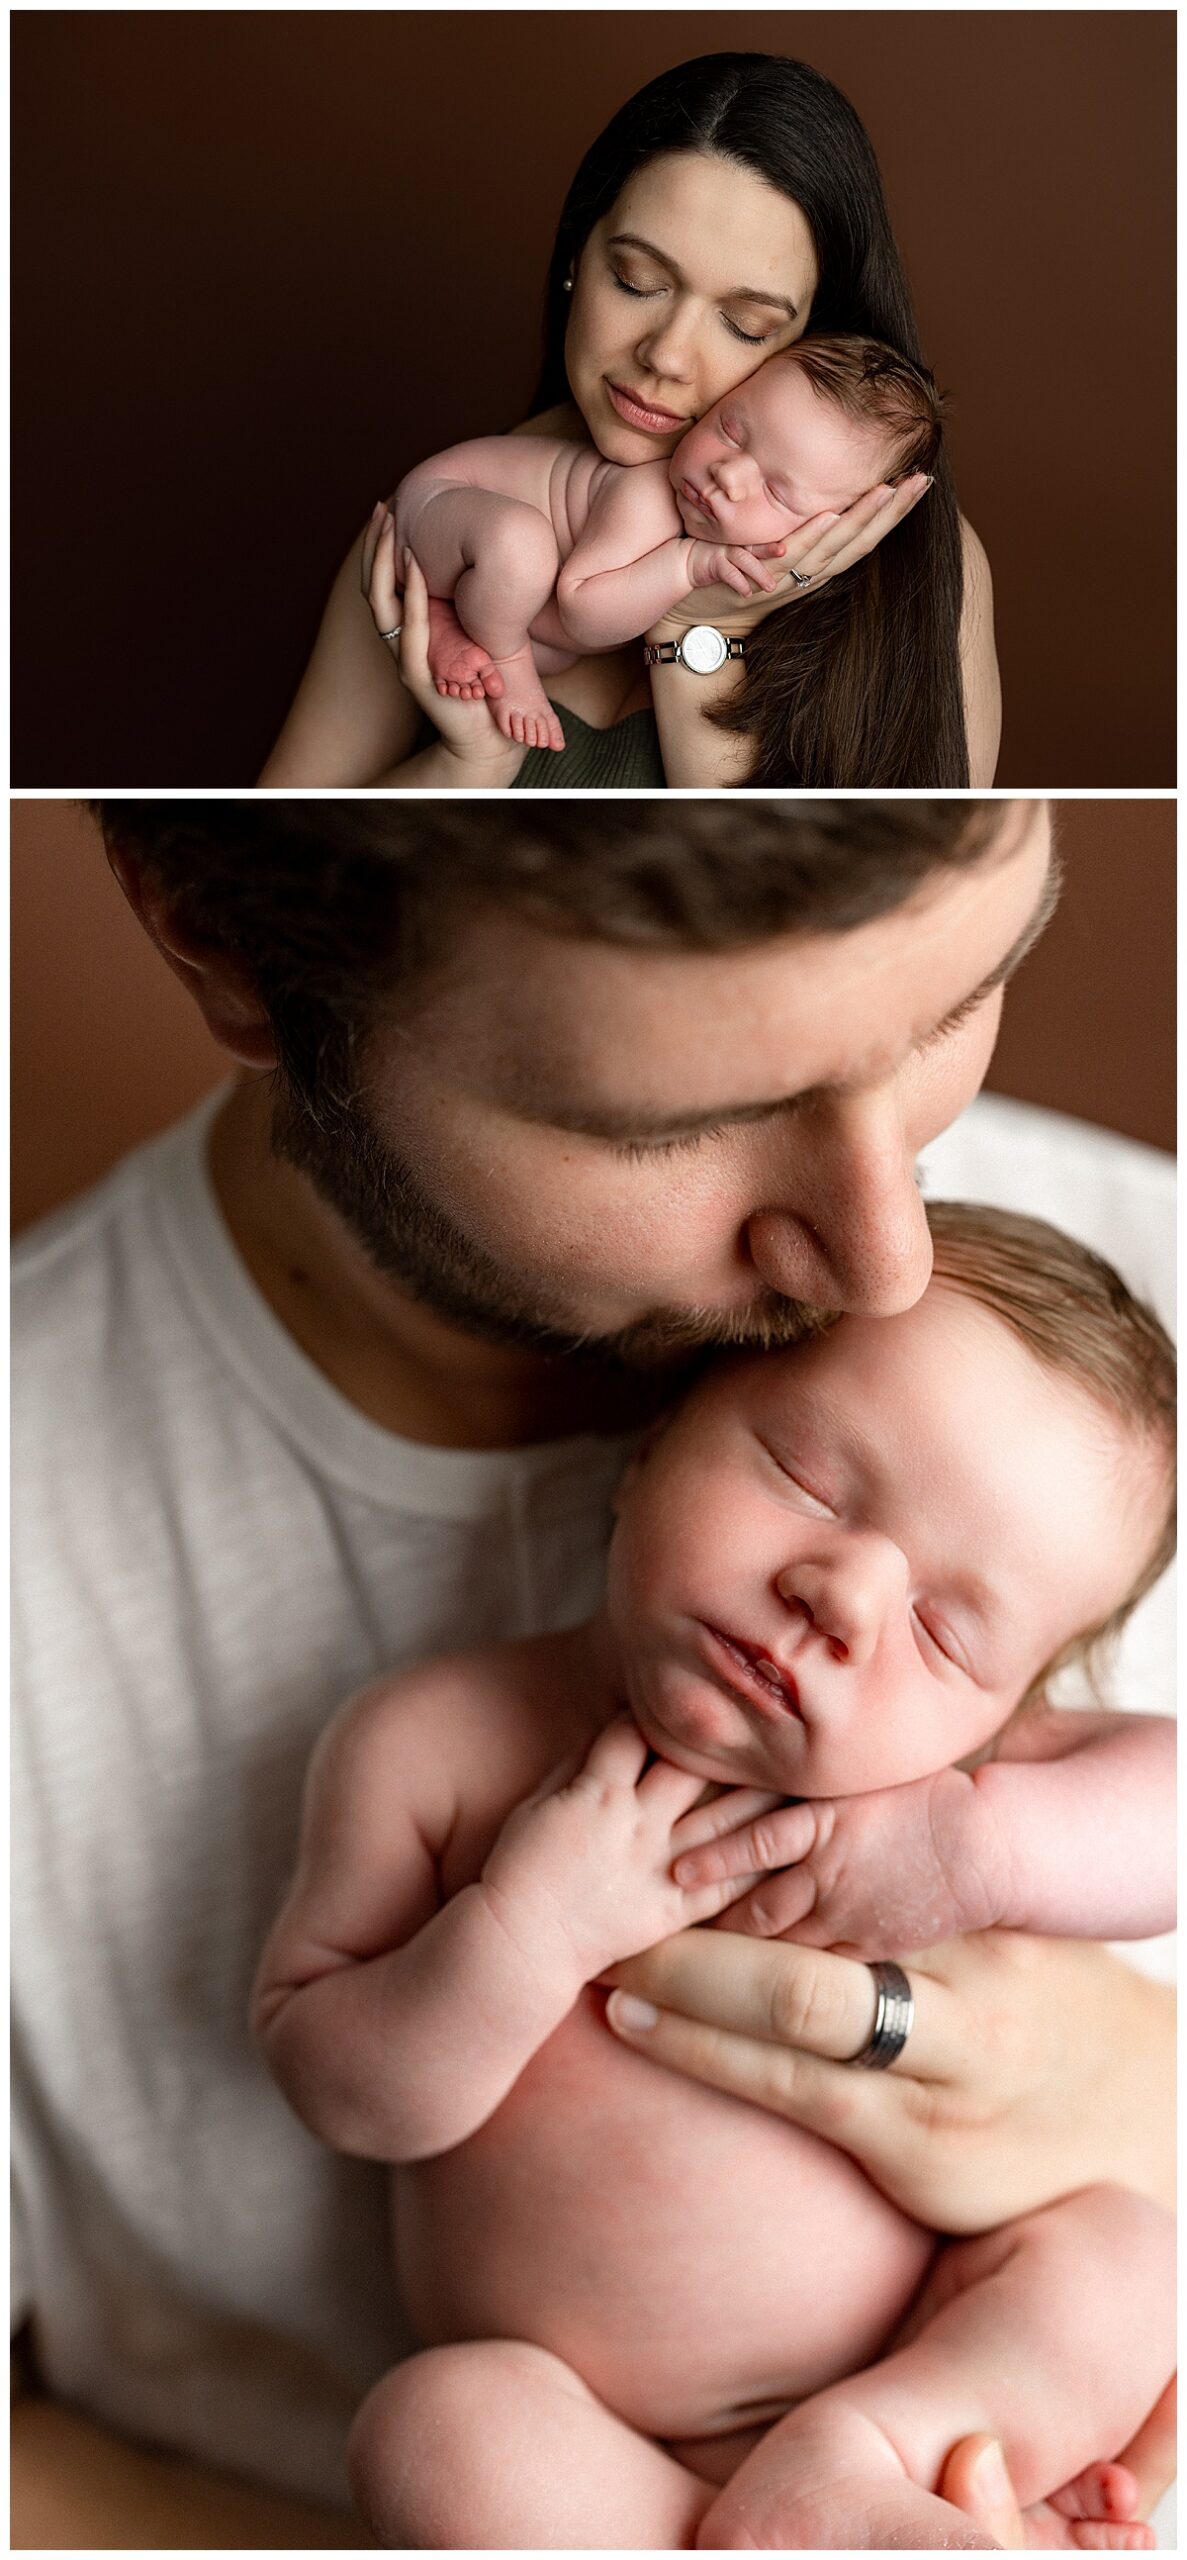 Parents match with their infant as a way to Personalize Your Newborn Session